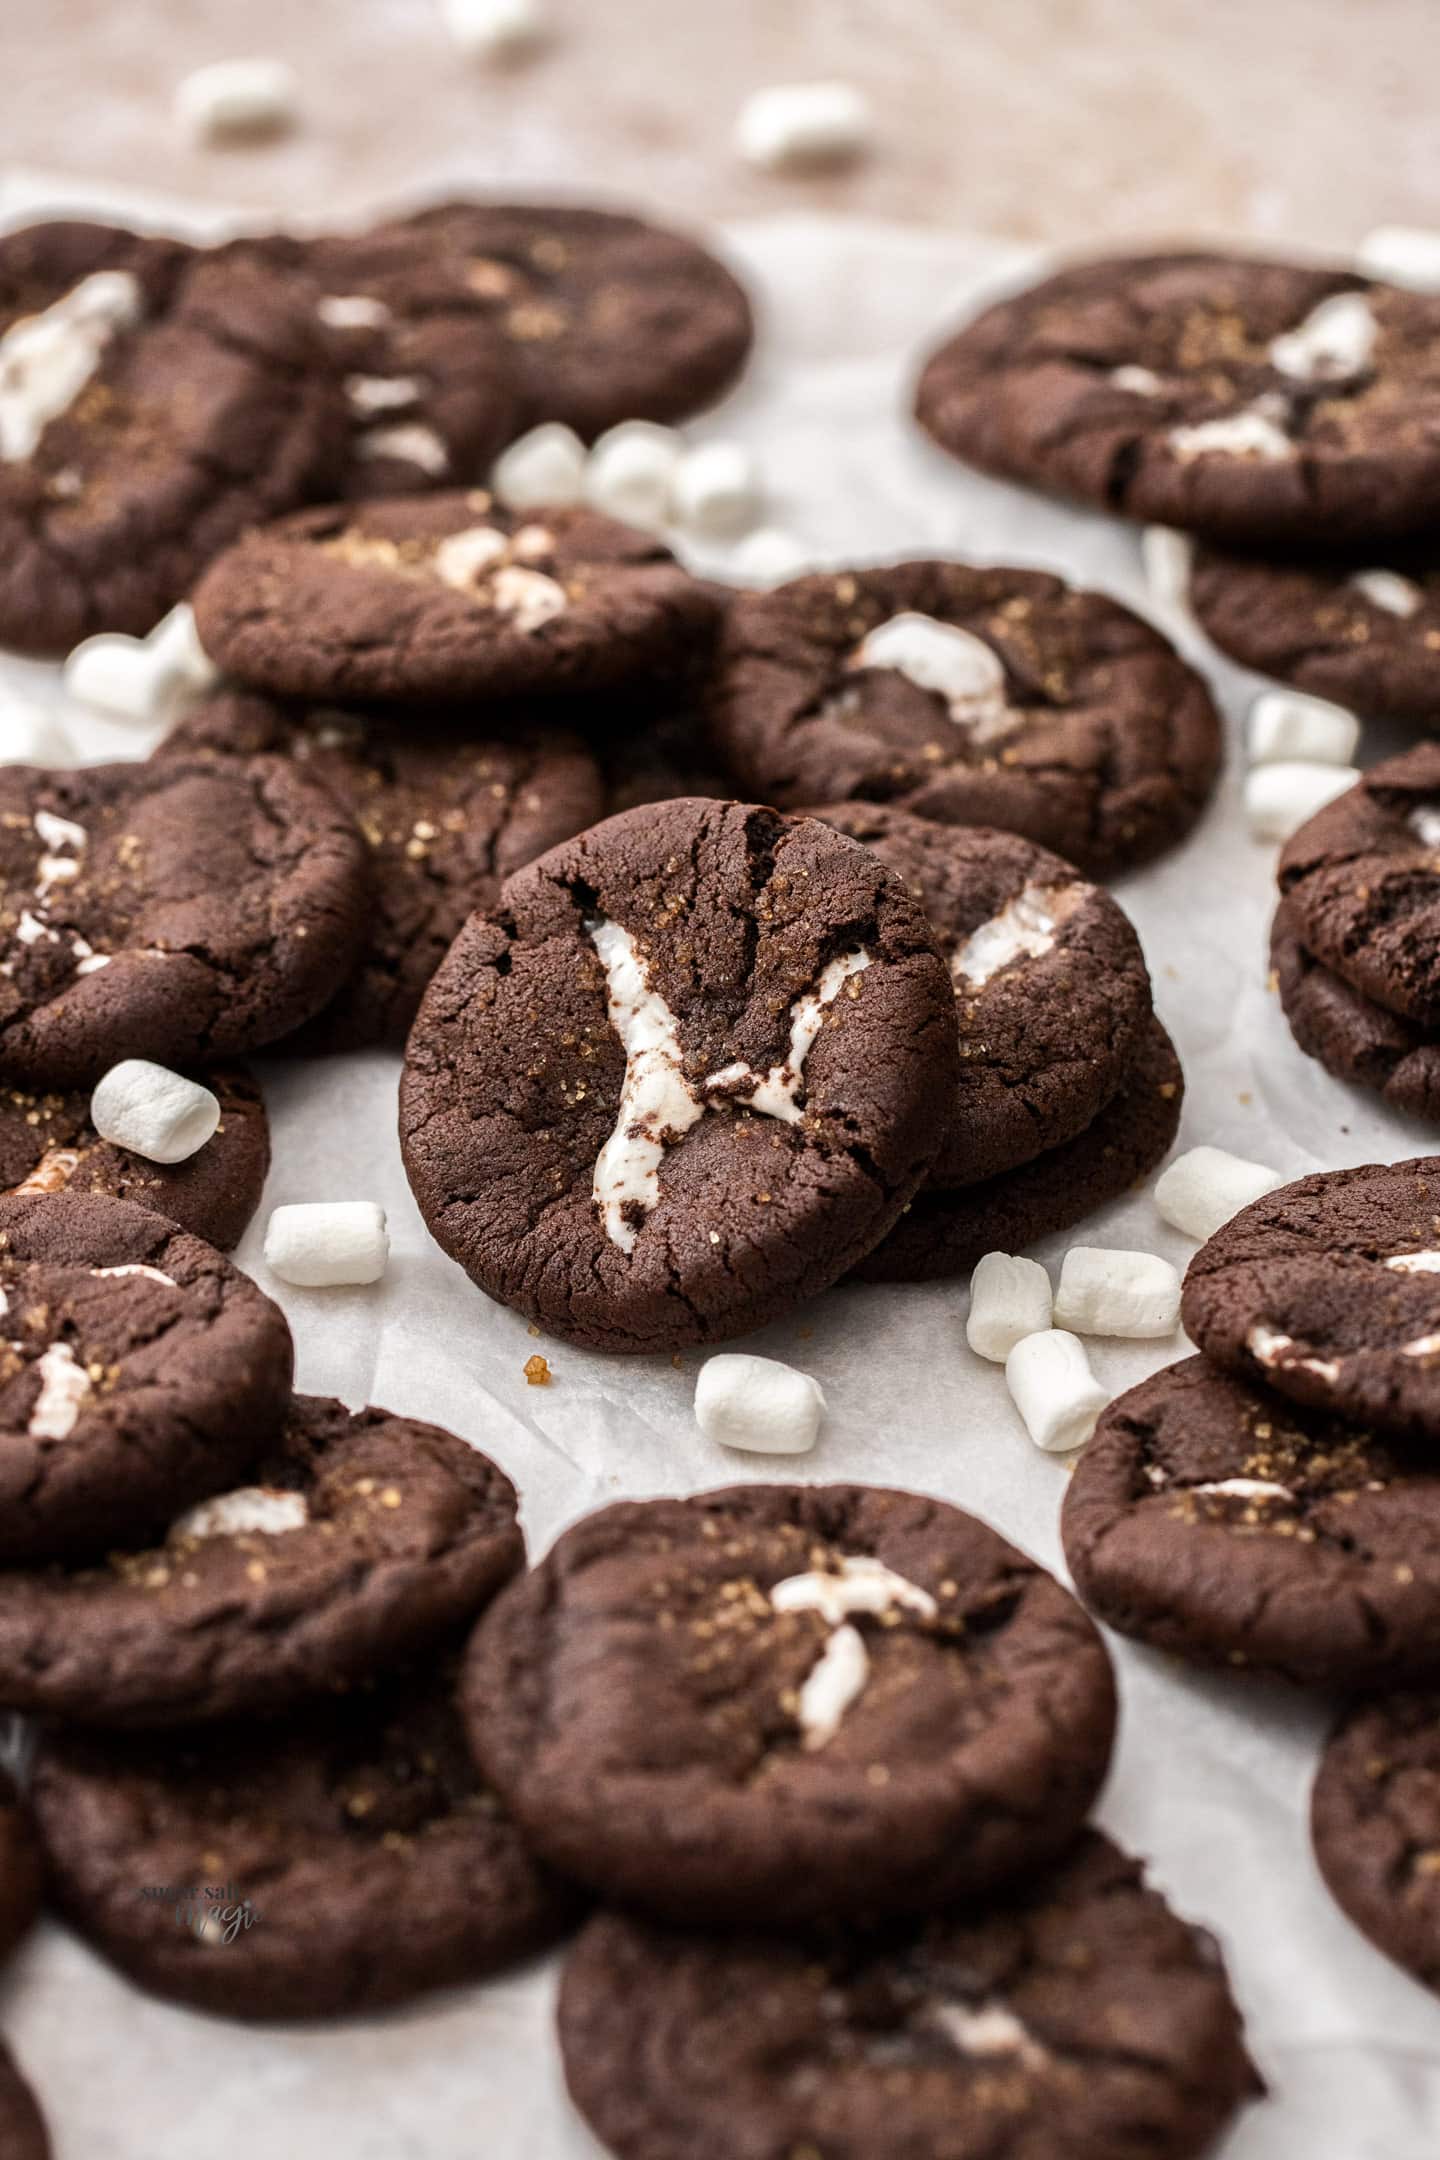 A small stack of chocolate marshmallow cookies, surrounded by more.